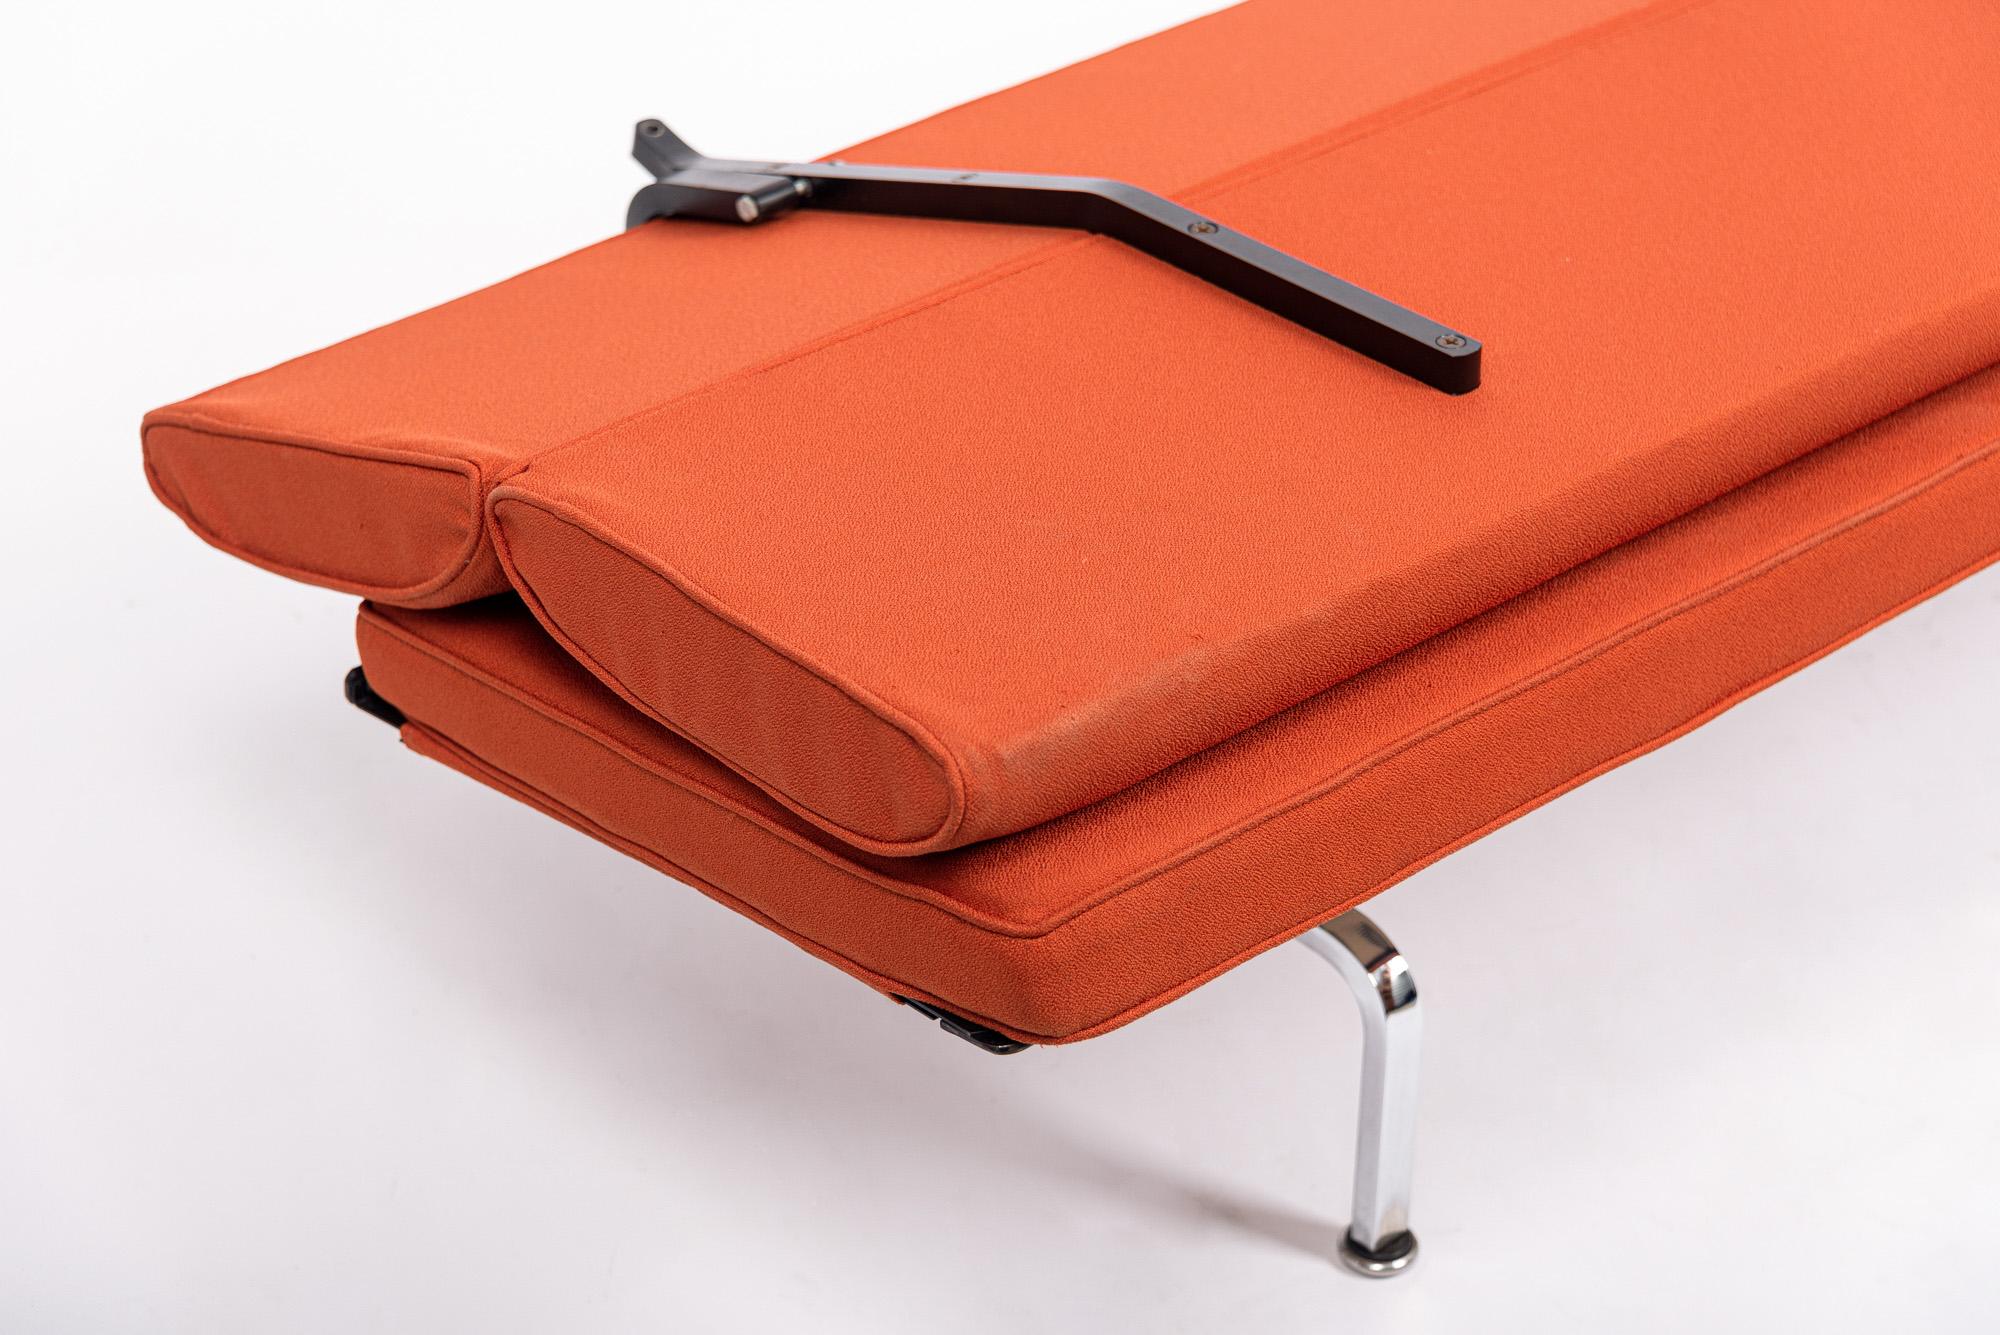 Steel 1970s Midcentury Orange Sofa Compact by Charles & Ray Eames for Herman Miller